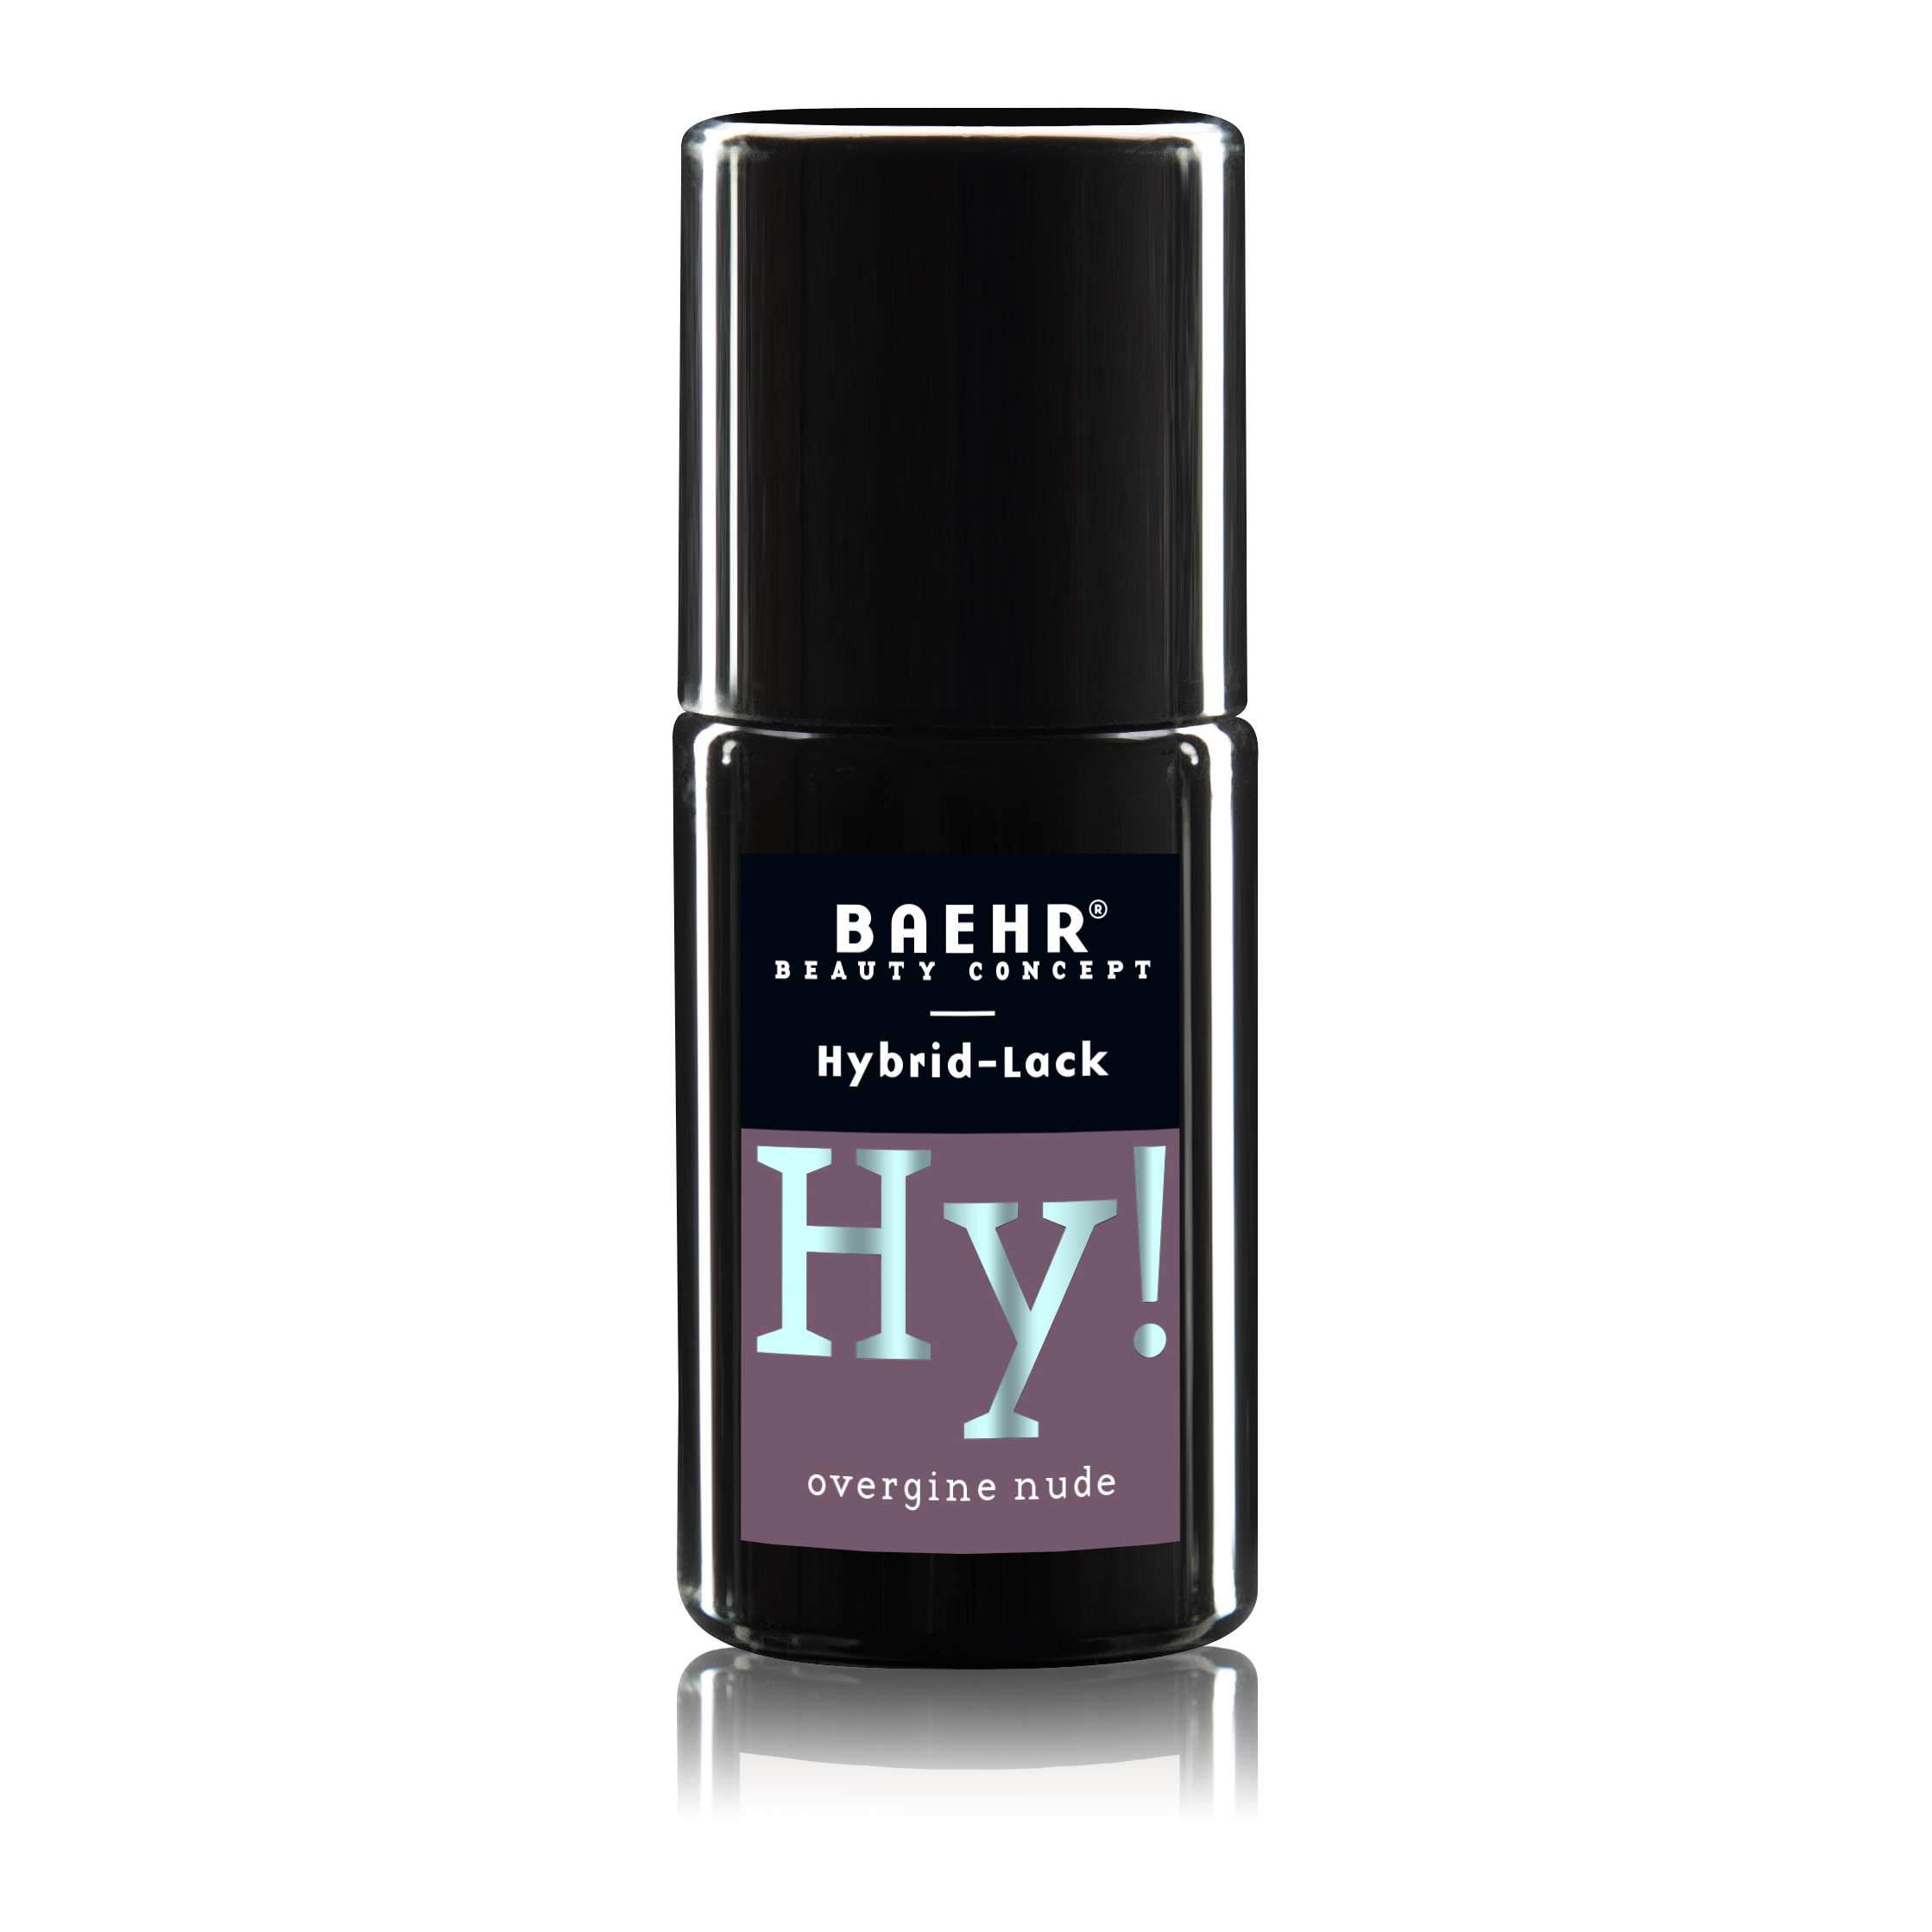 BAEHR BEAUTY CONCEPT - NAILS Hy! Hybrid-Lack, overgine nude 8 ml